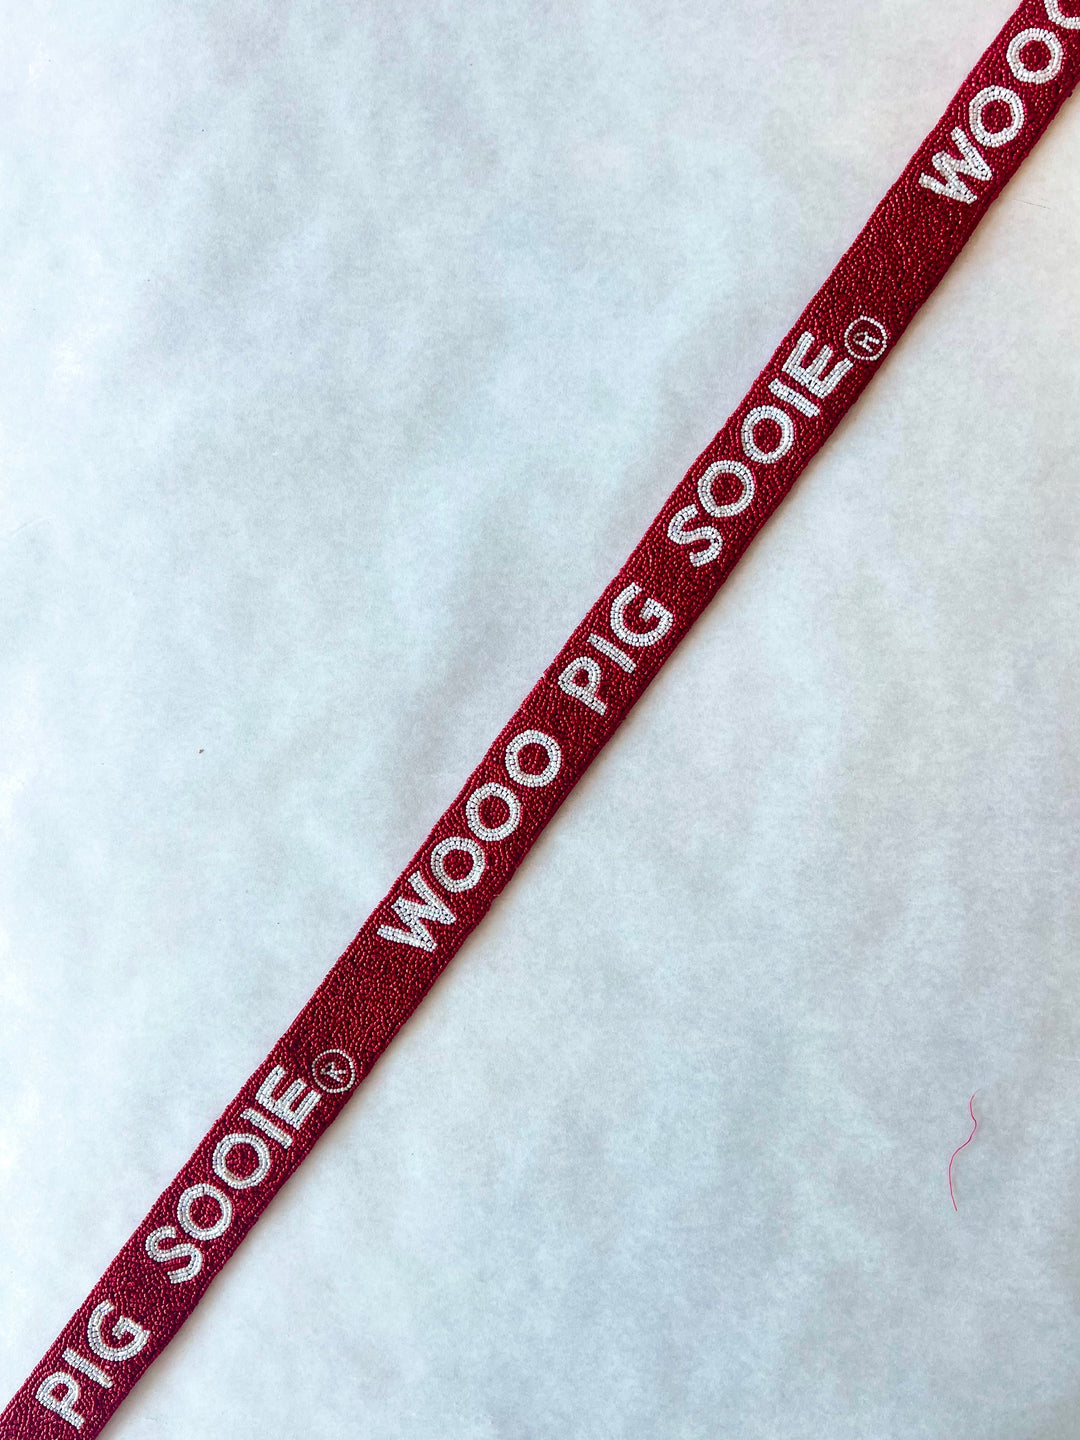 Woo Pig Beaded Strap, Miscellaneous, Adeline, Adeline, dallas boutique, dallas texas, texas boutique, women's boutique dallas, adeline boutique, dallas boutique, trendy boutique, affordable boutique